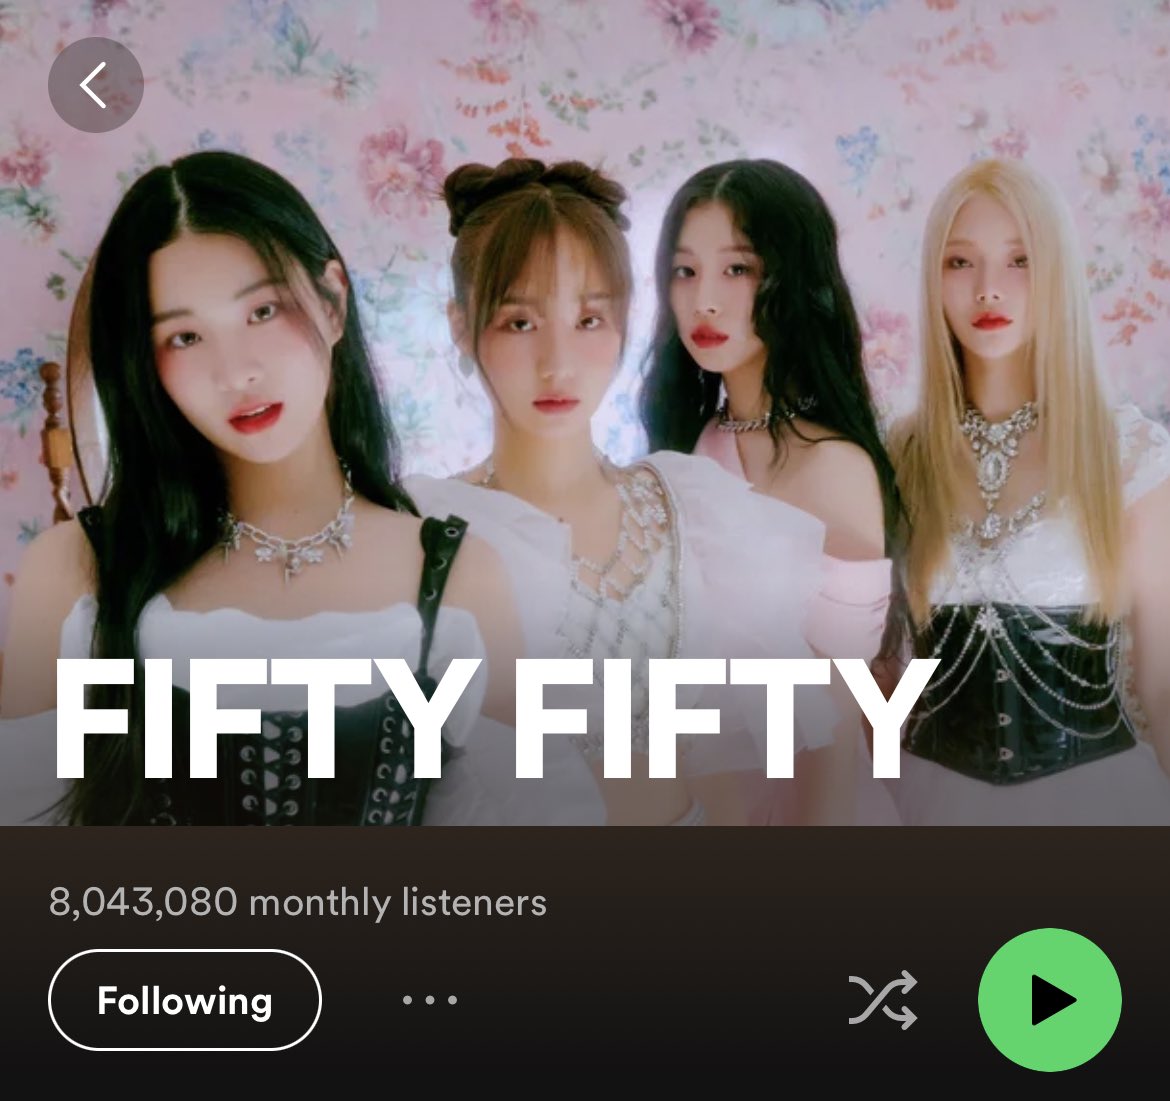 8m monthly listeners… to say that i‘m proud is an understatement ☹️

#FIFTYFIFTY #CupidOnHot100 #FIFTYFIFTY_Cupid #FIFTY_FIFTY